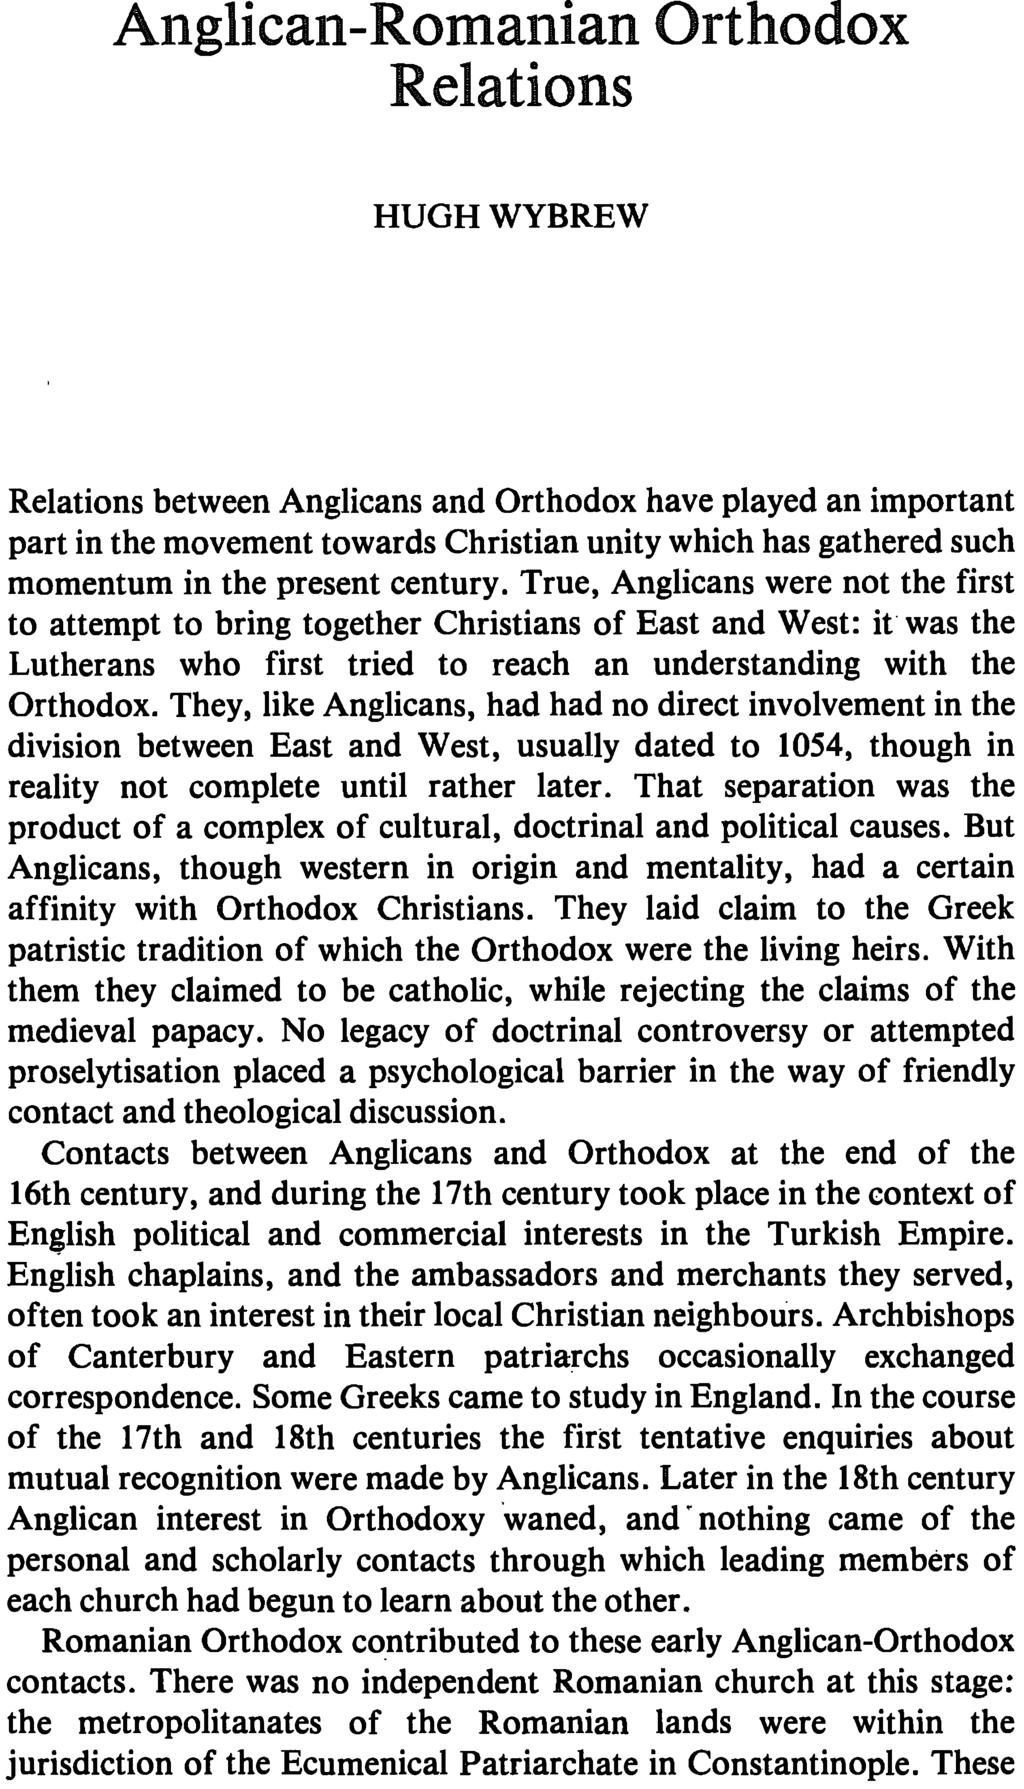 Anglican -Romanian Orthodox Relations HUGHWYBREW Relations between Anglicans and Orthodox have played an important part in the movement towards Christian unity which has gathered such momentum in the